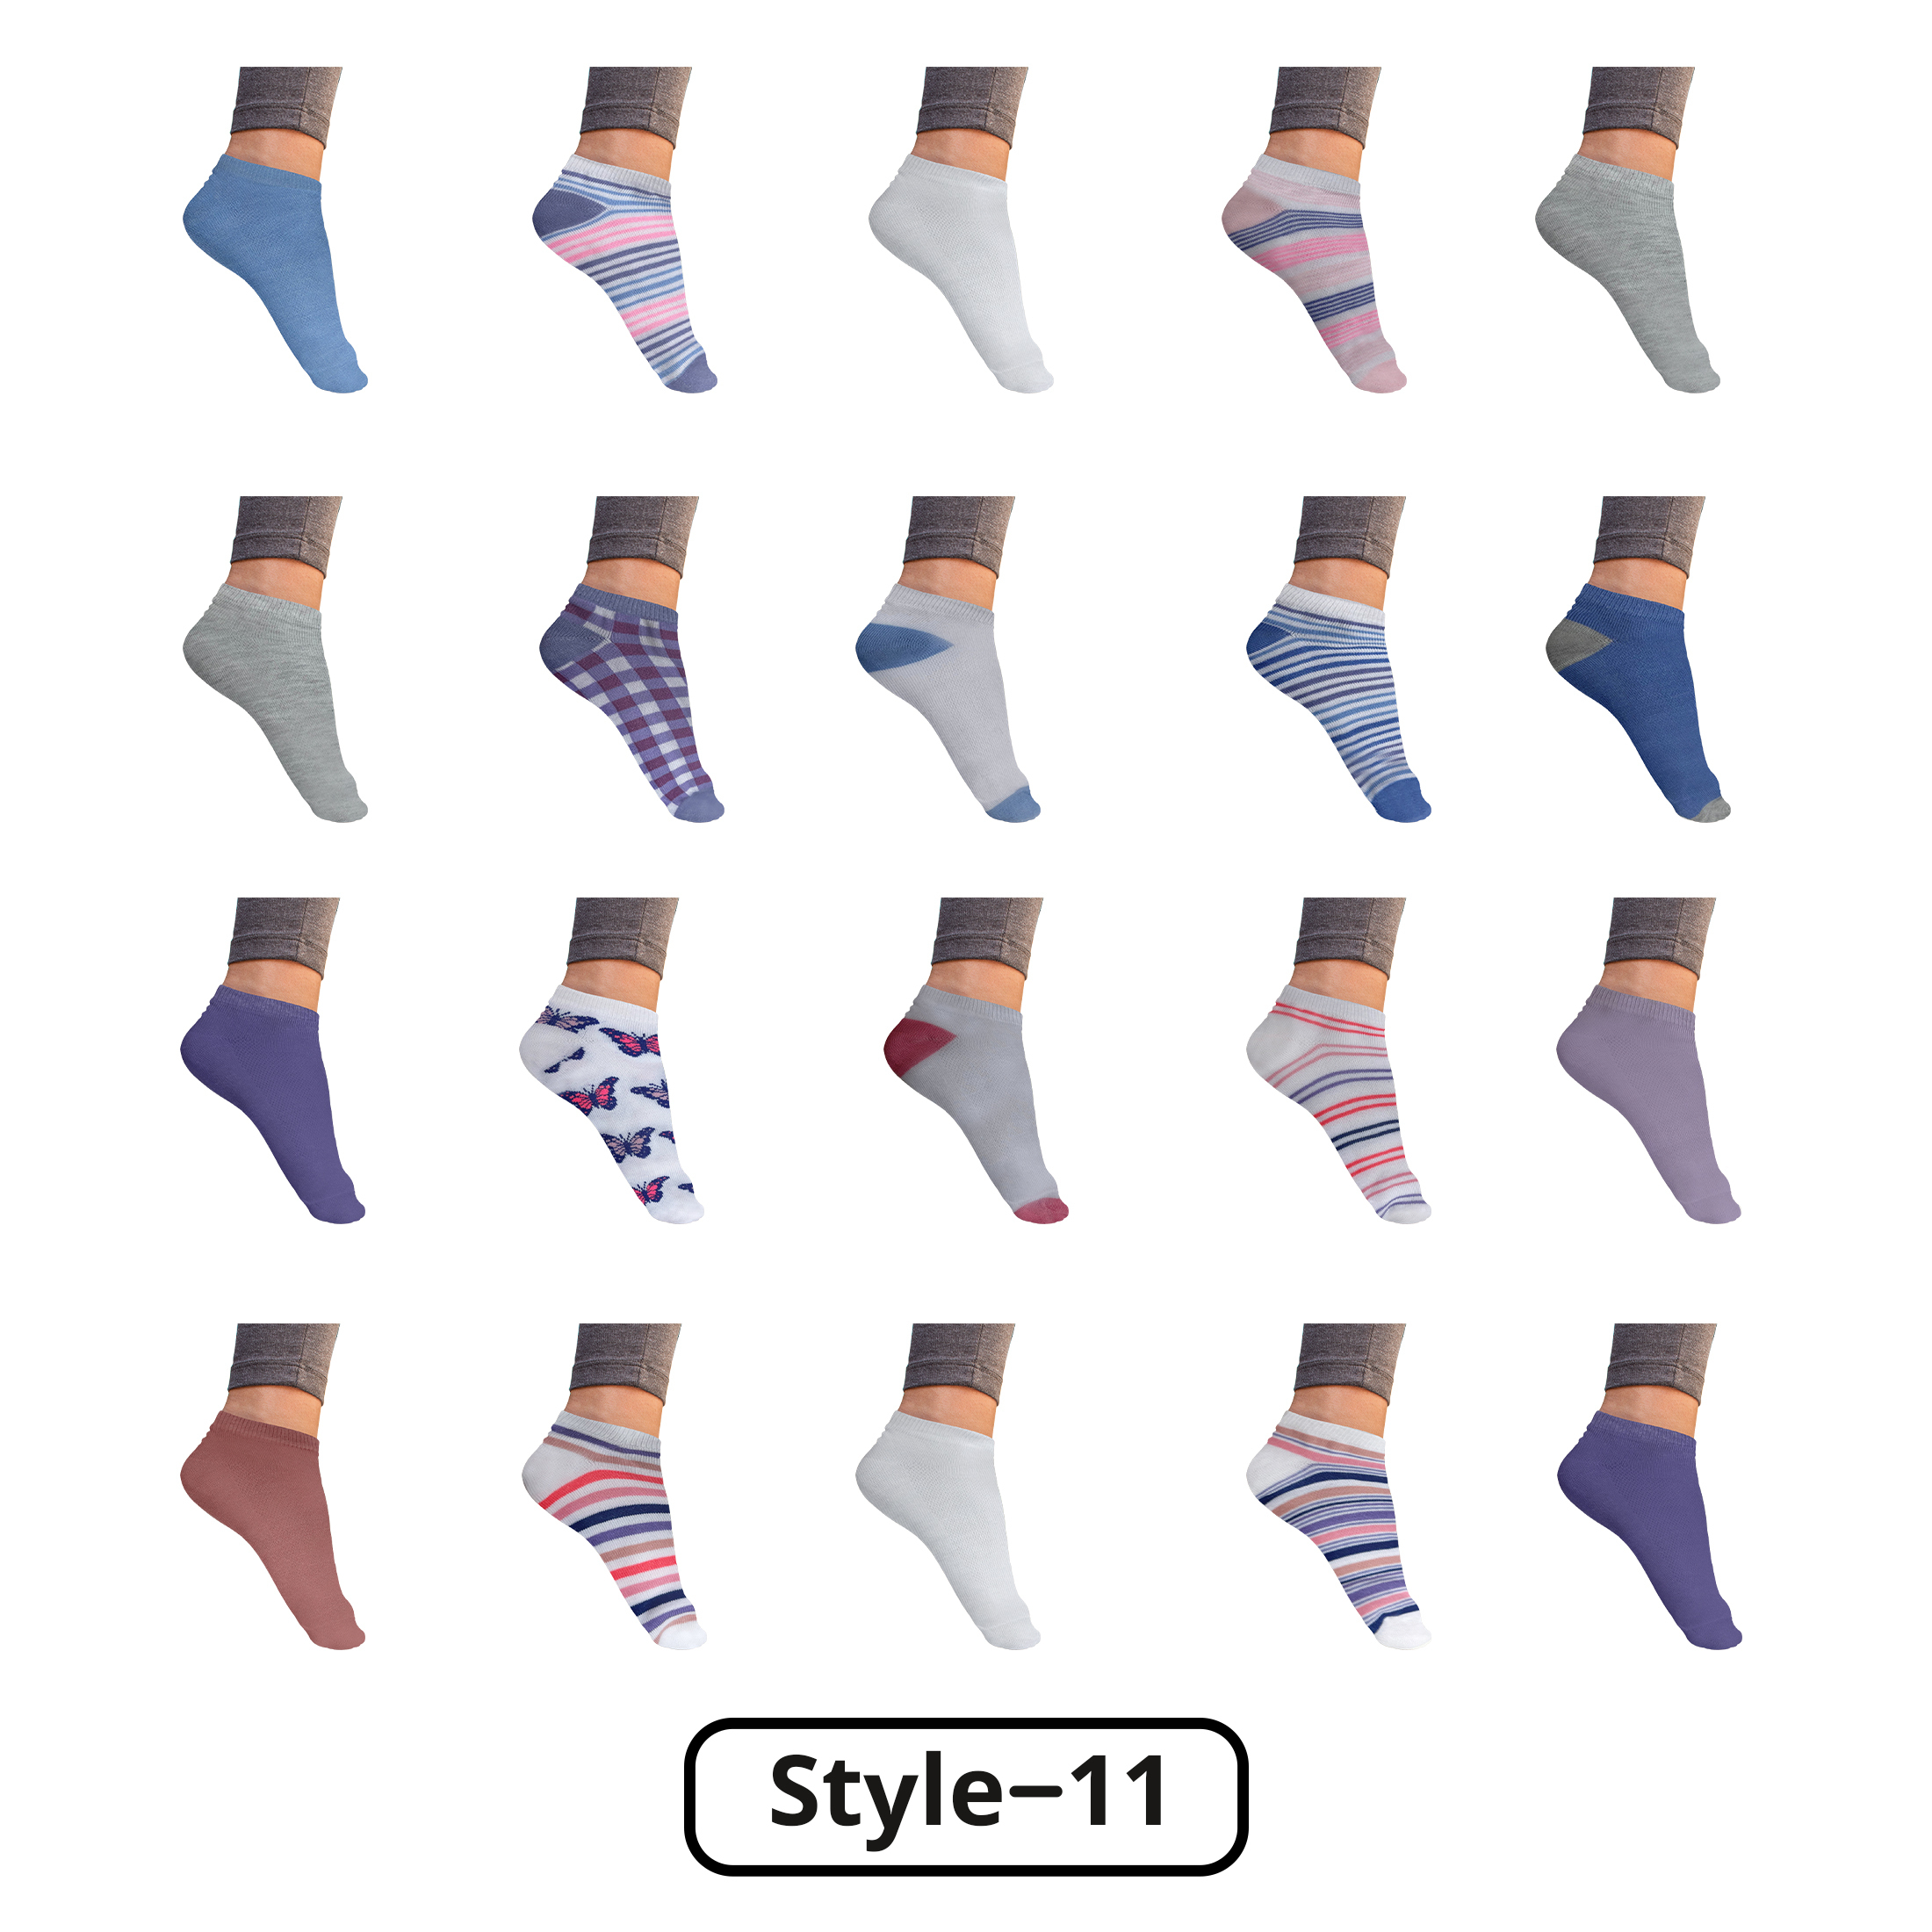 20-Pairs: Women’s Breathable Stylish Colorful Fun No Show Low Cut Ankle Socks - Style 11